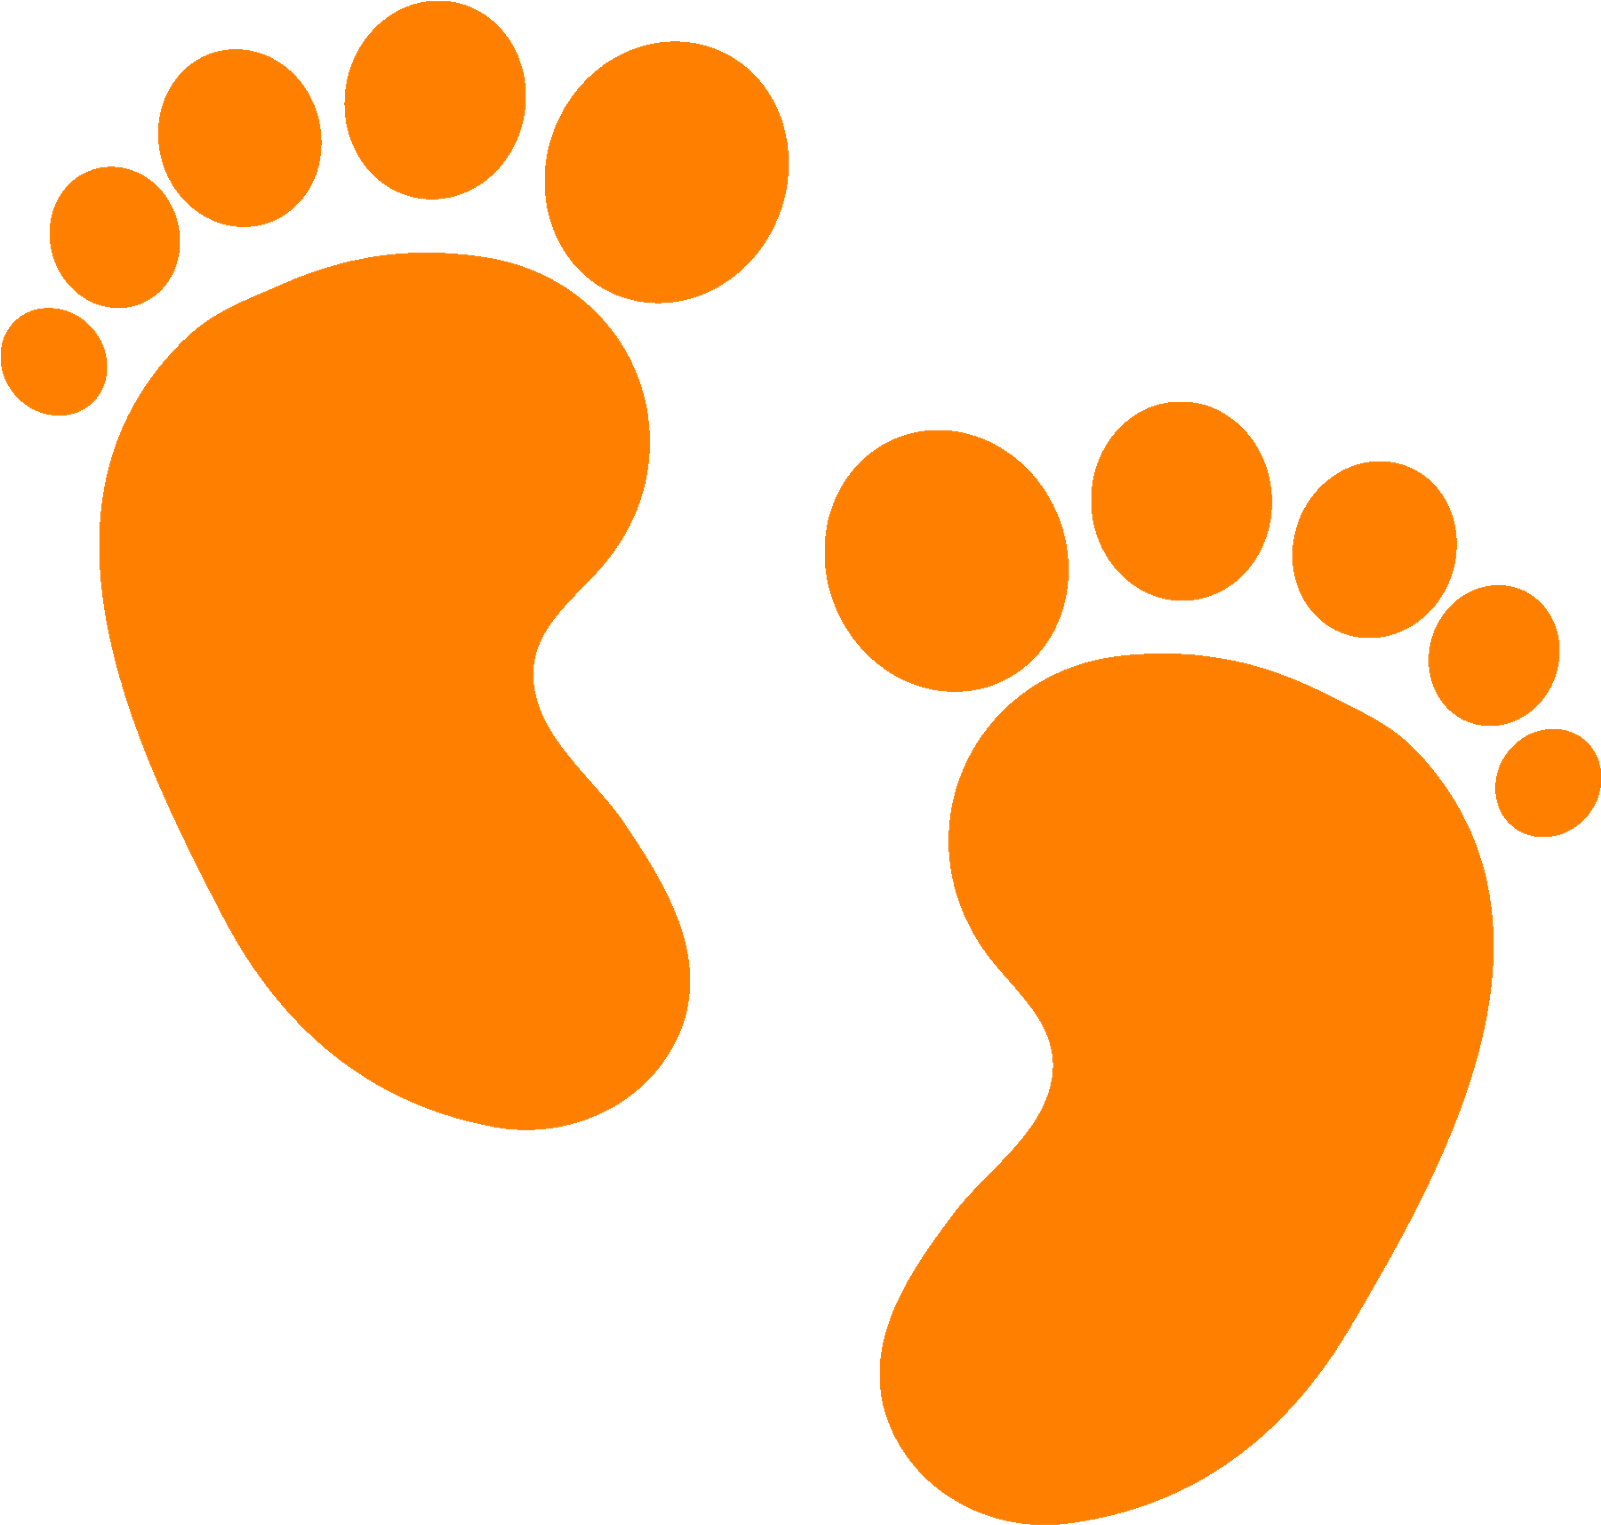 00, We Break Off Into Math Rotations/centers - Baby Feet Silhouette Png (1600x1600)